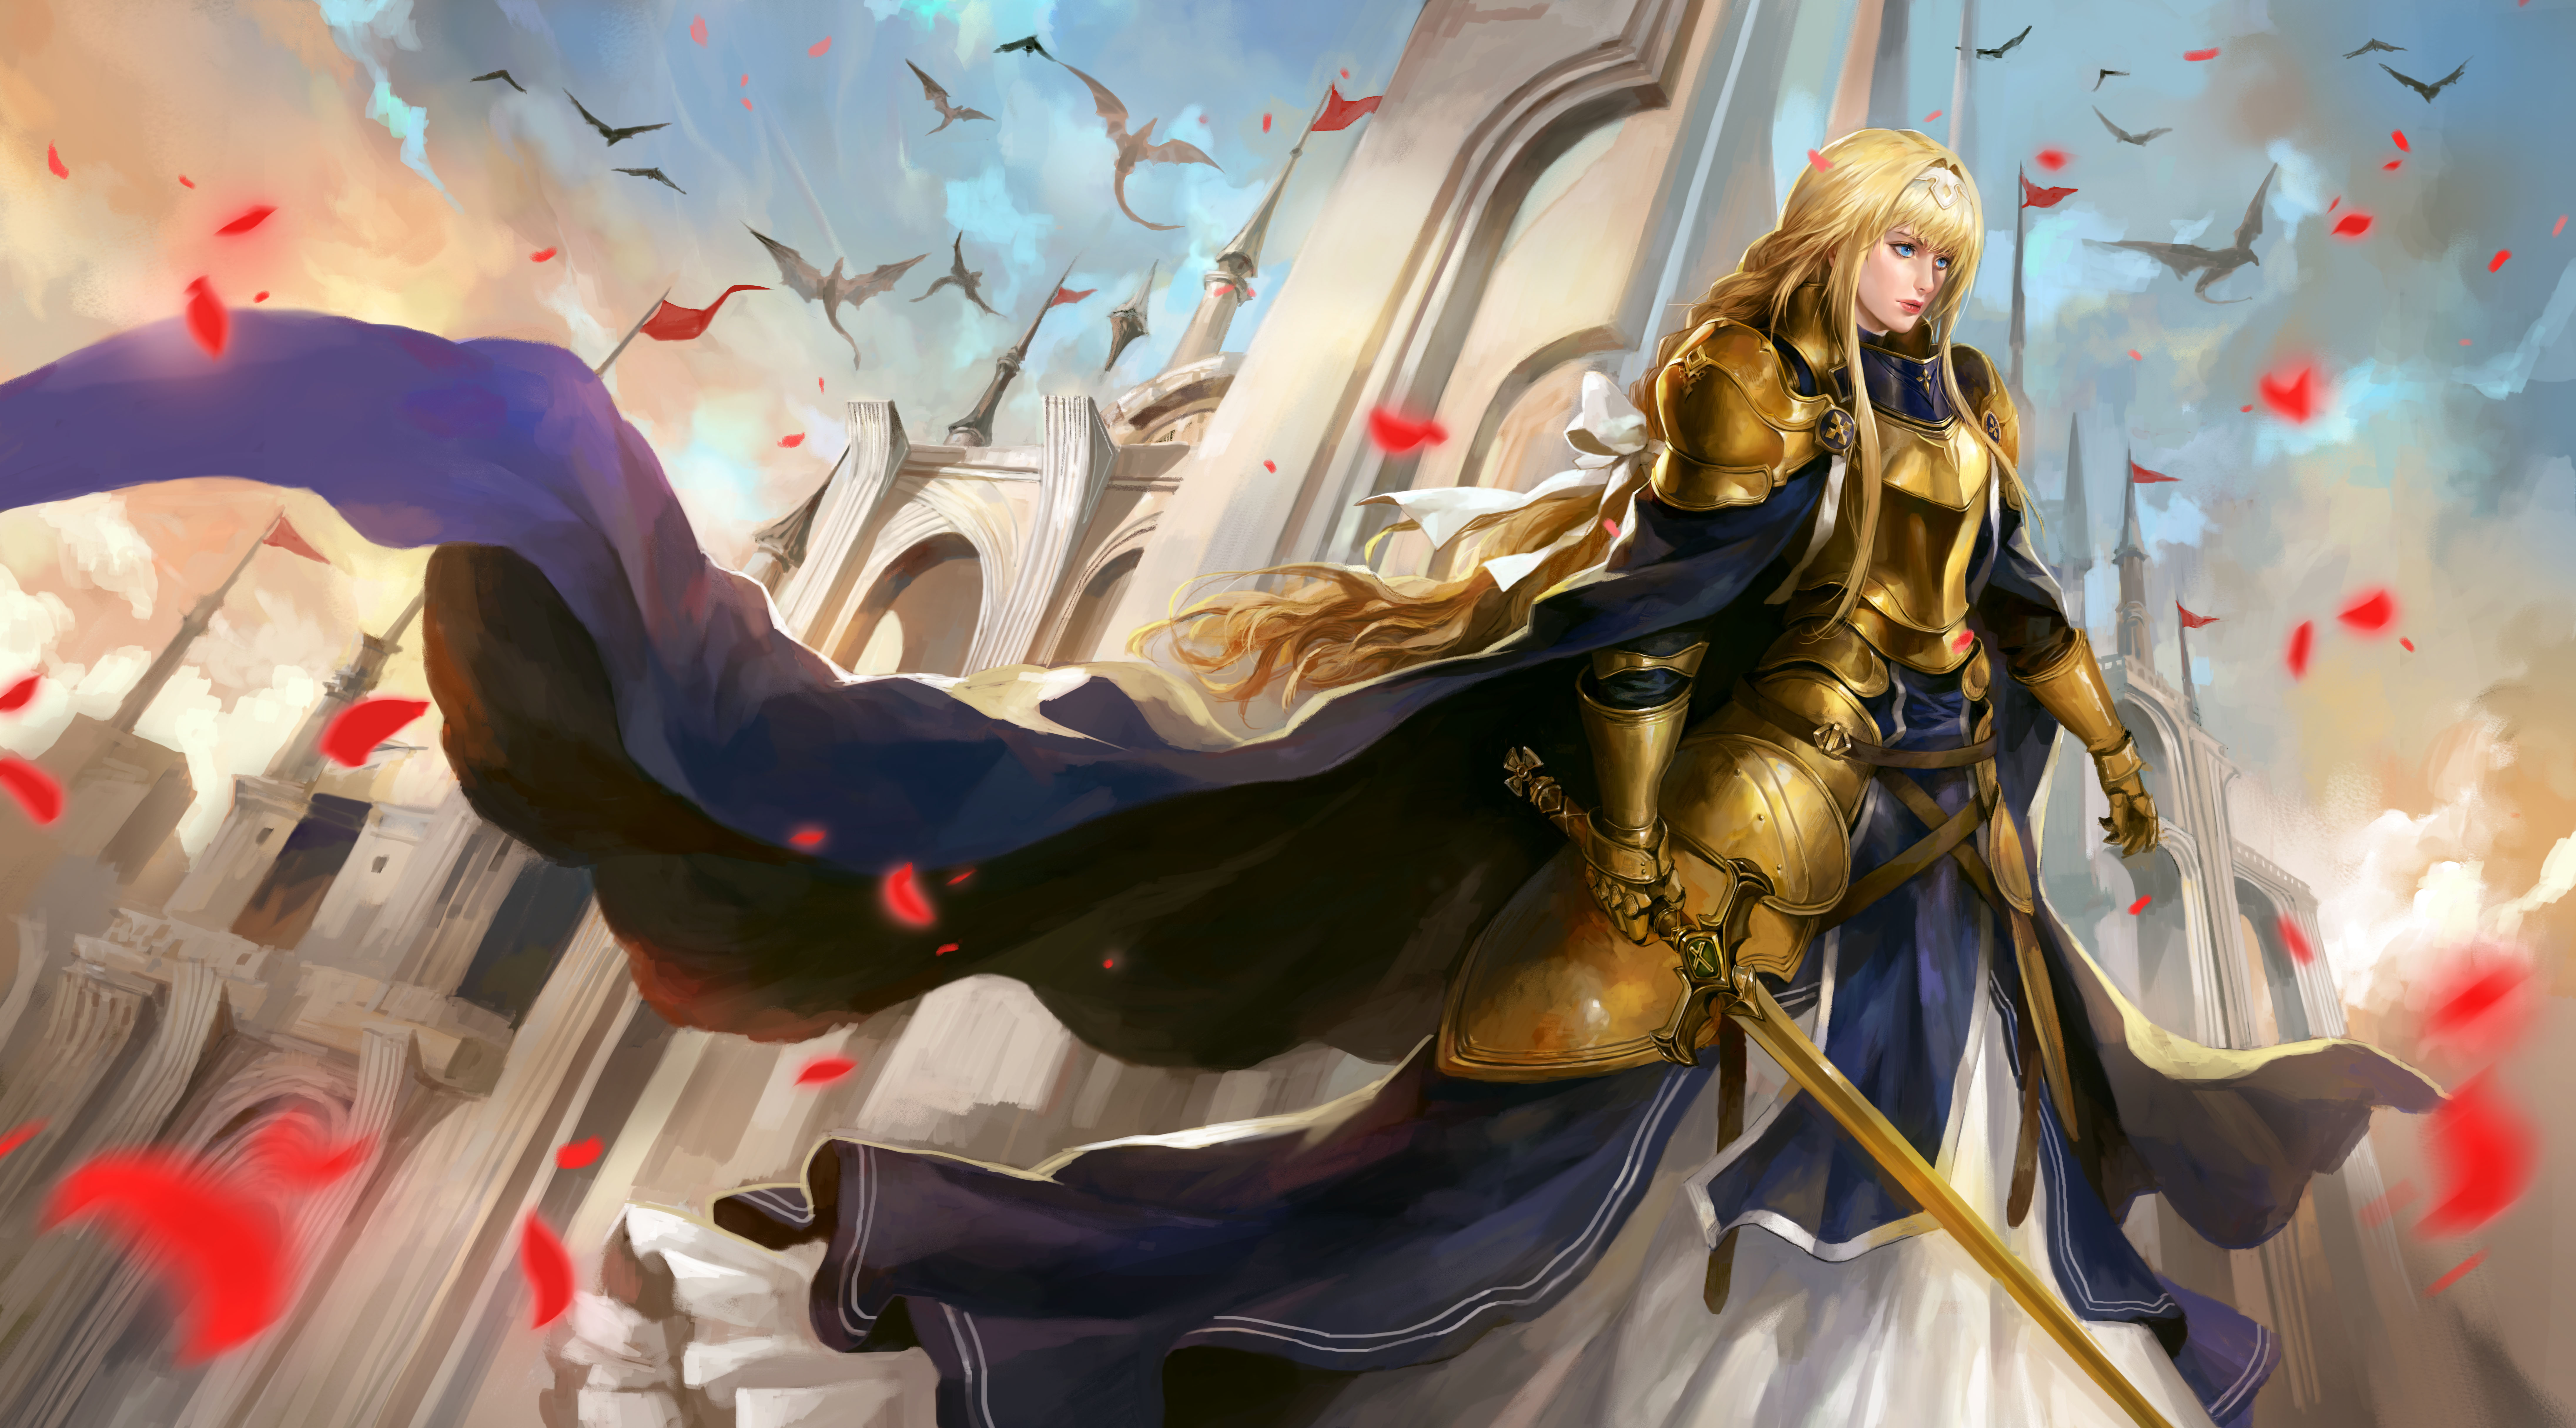 anime girl with blonde hair and blue eyes with sword